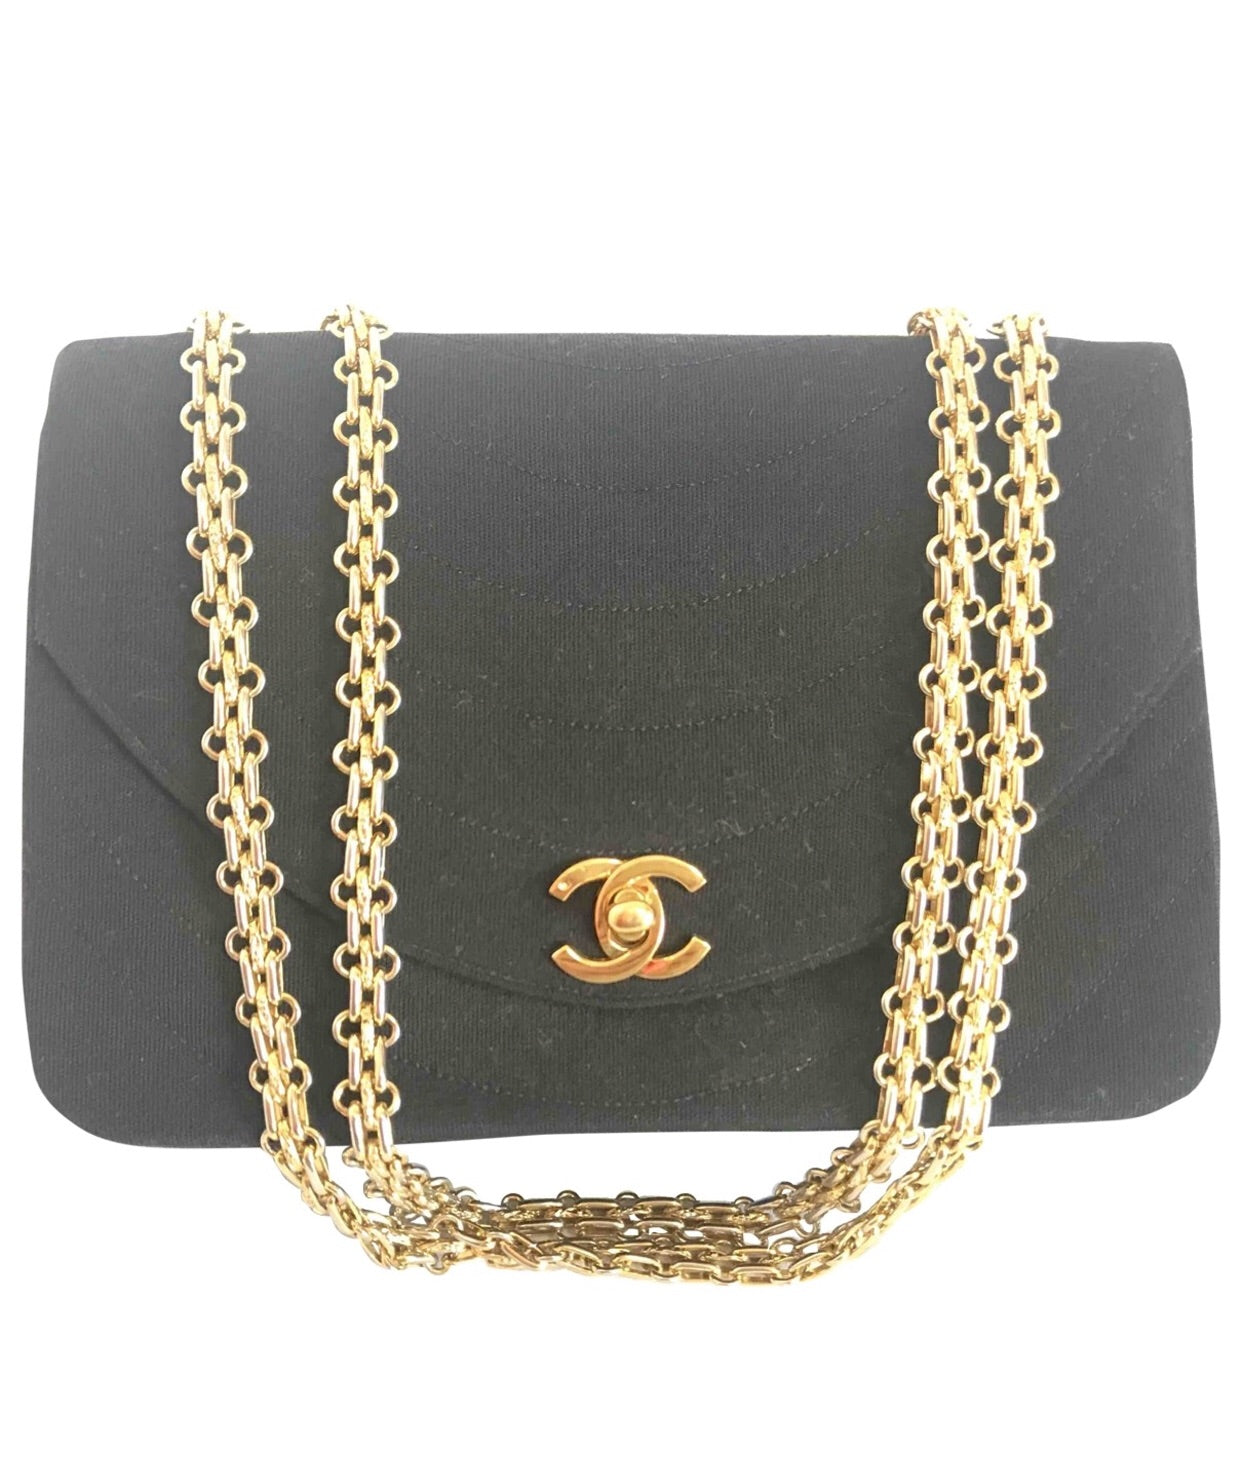 red chanel bag with gold chain